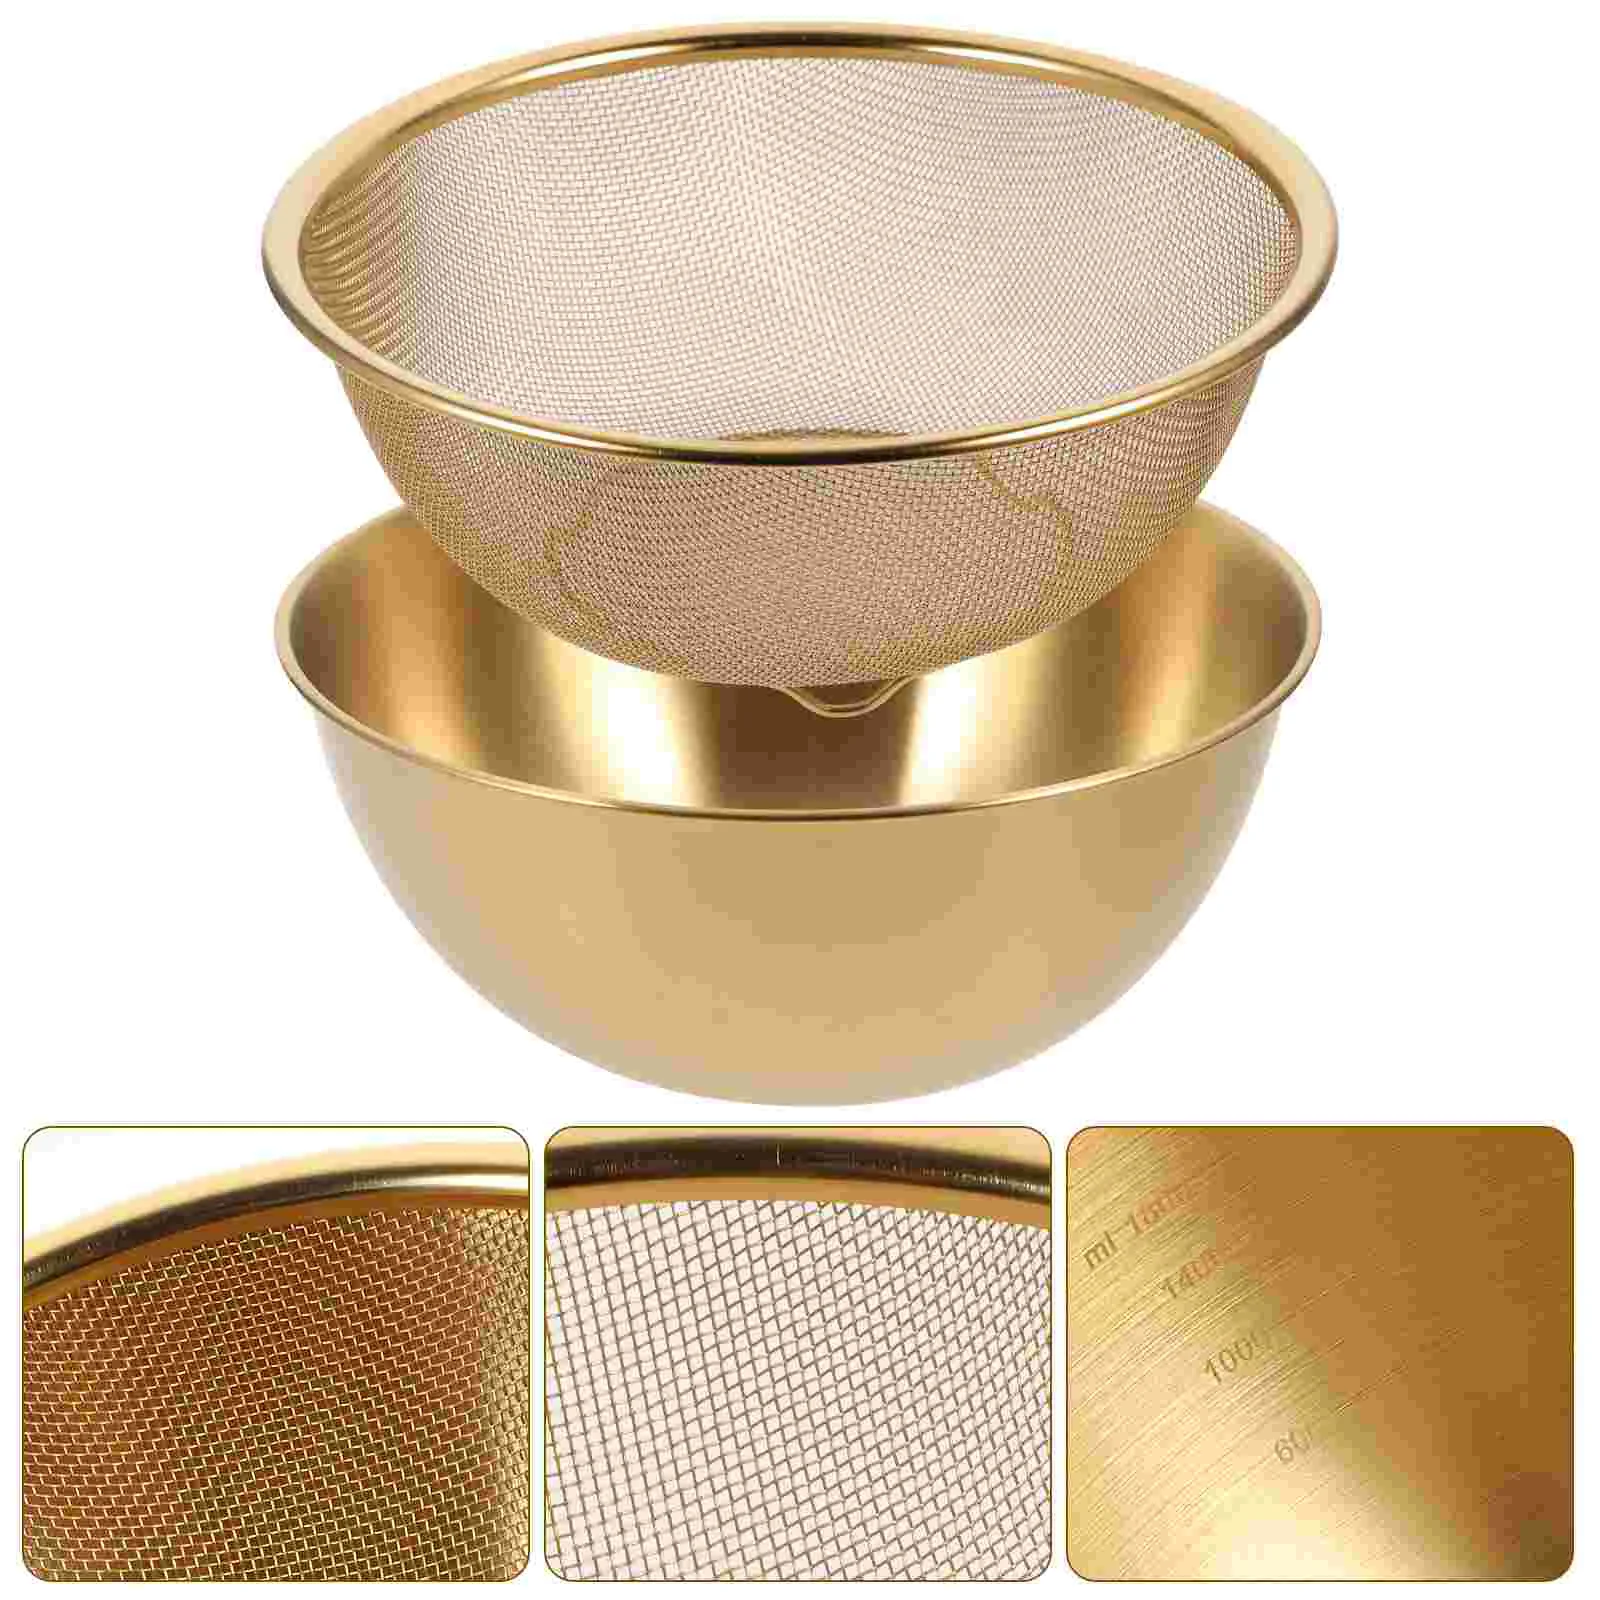 

Stainless Steel Drain Basket Rice Drainer Strainer Fruit Kitchen Countertop Metal Salad Cleaning Bowl Fine Mesh